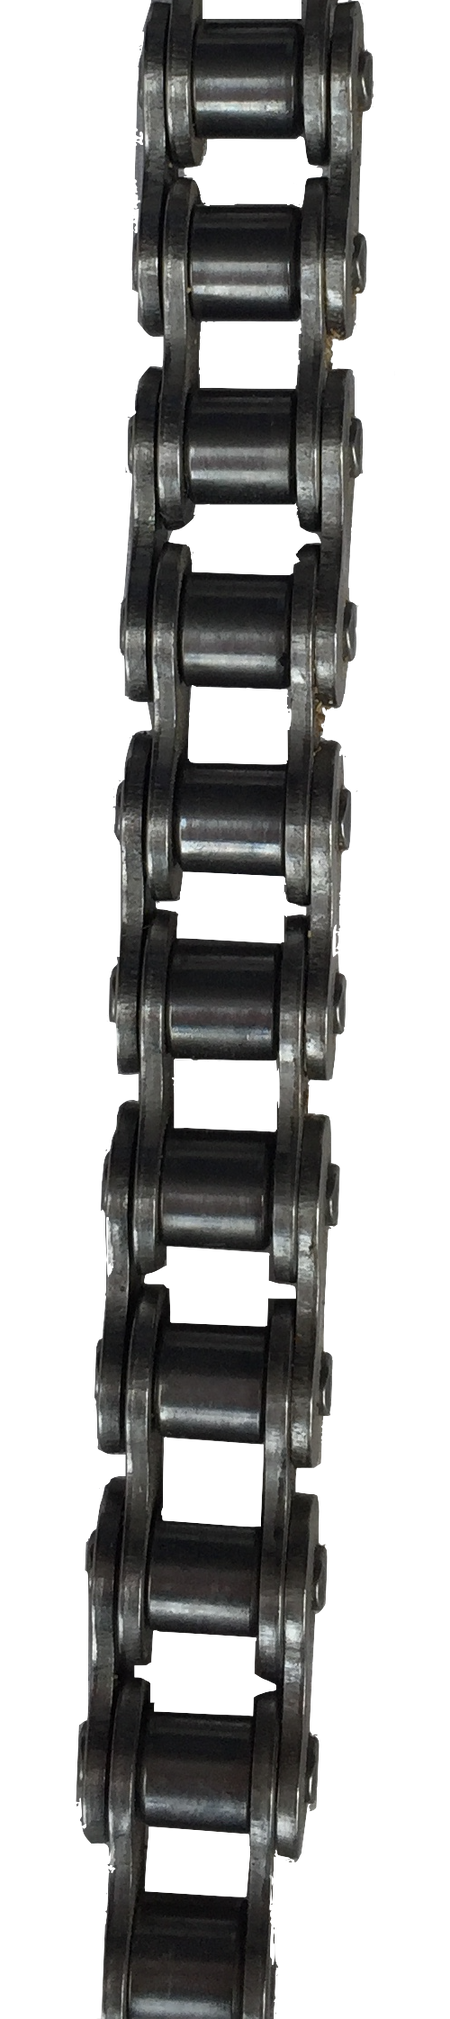 HKK #60 Aqua Series Standard Riveted Roller Chain (0.750" Pitch) - SOLD BY THE FOOT - Froedge Machine & Supply Co., Inc.